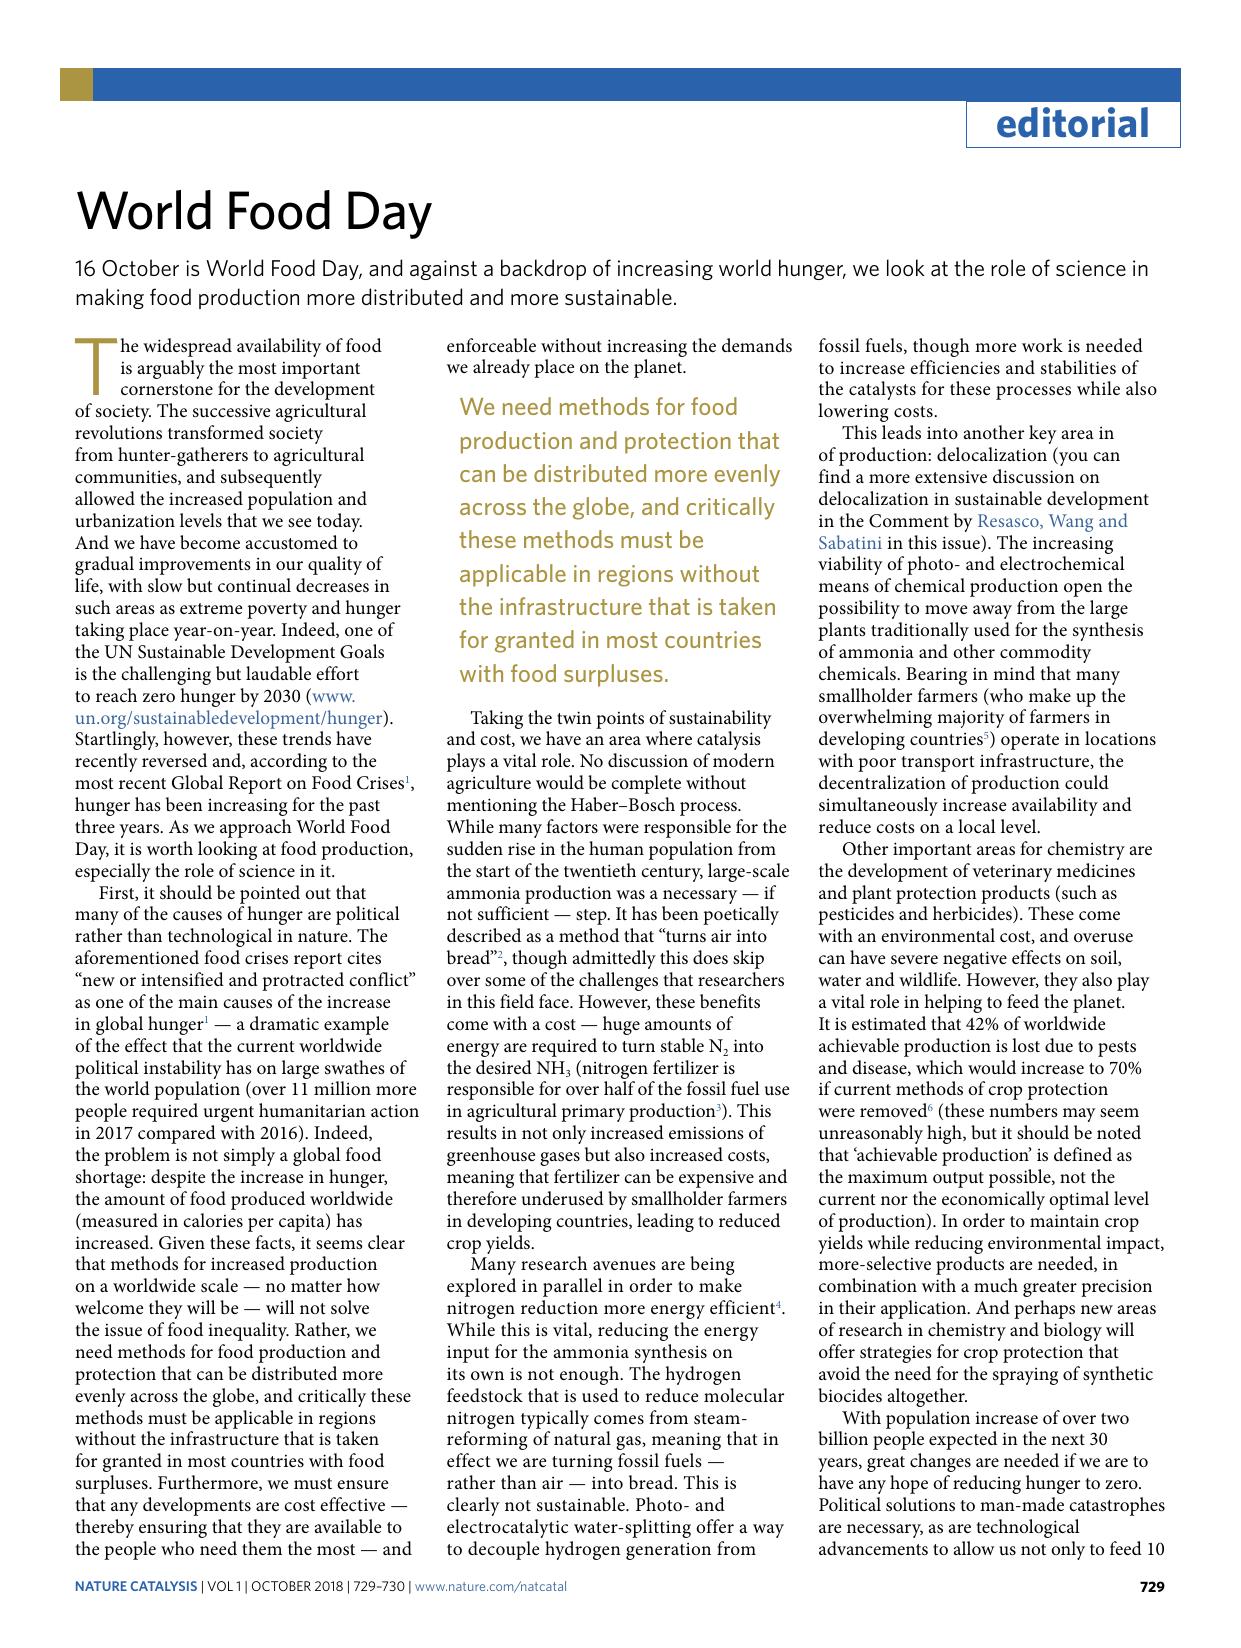 World Food Day by Unknown